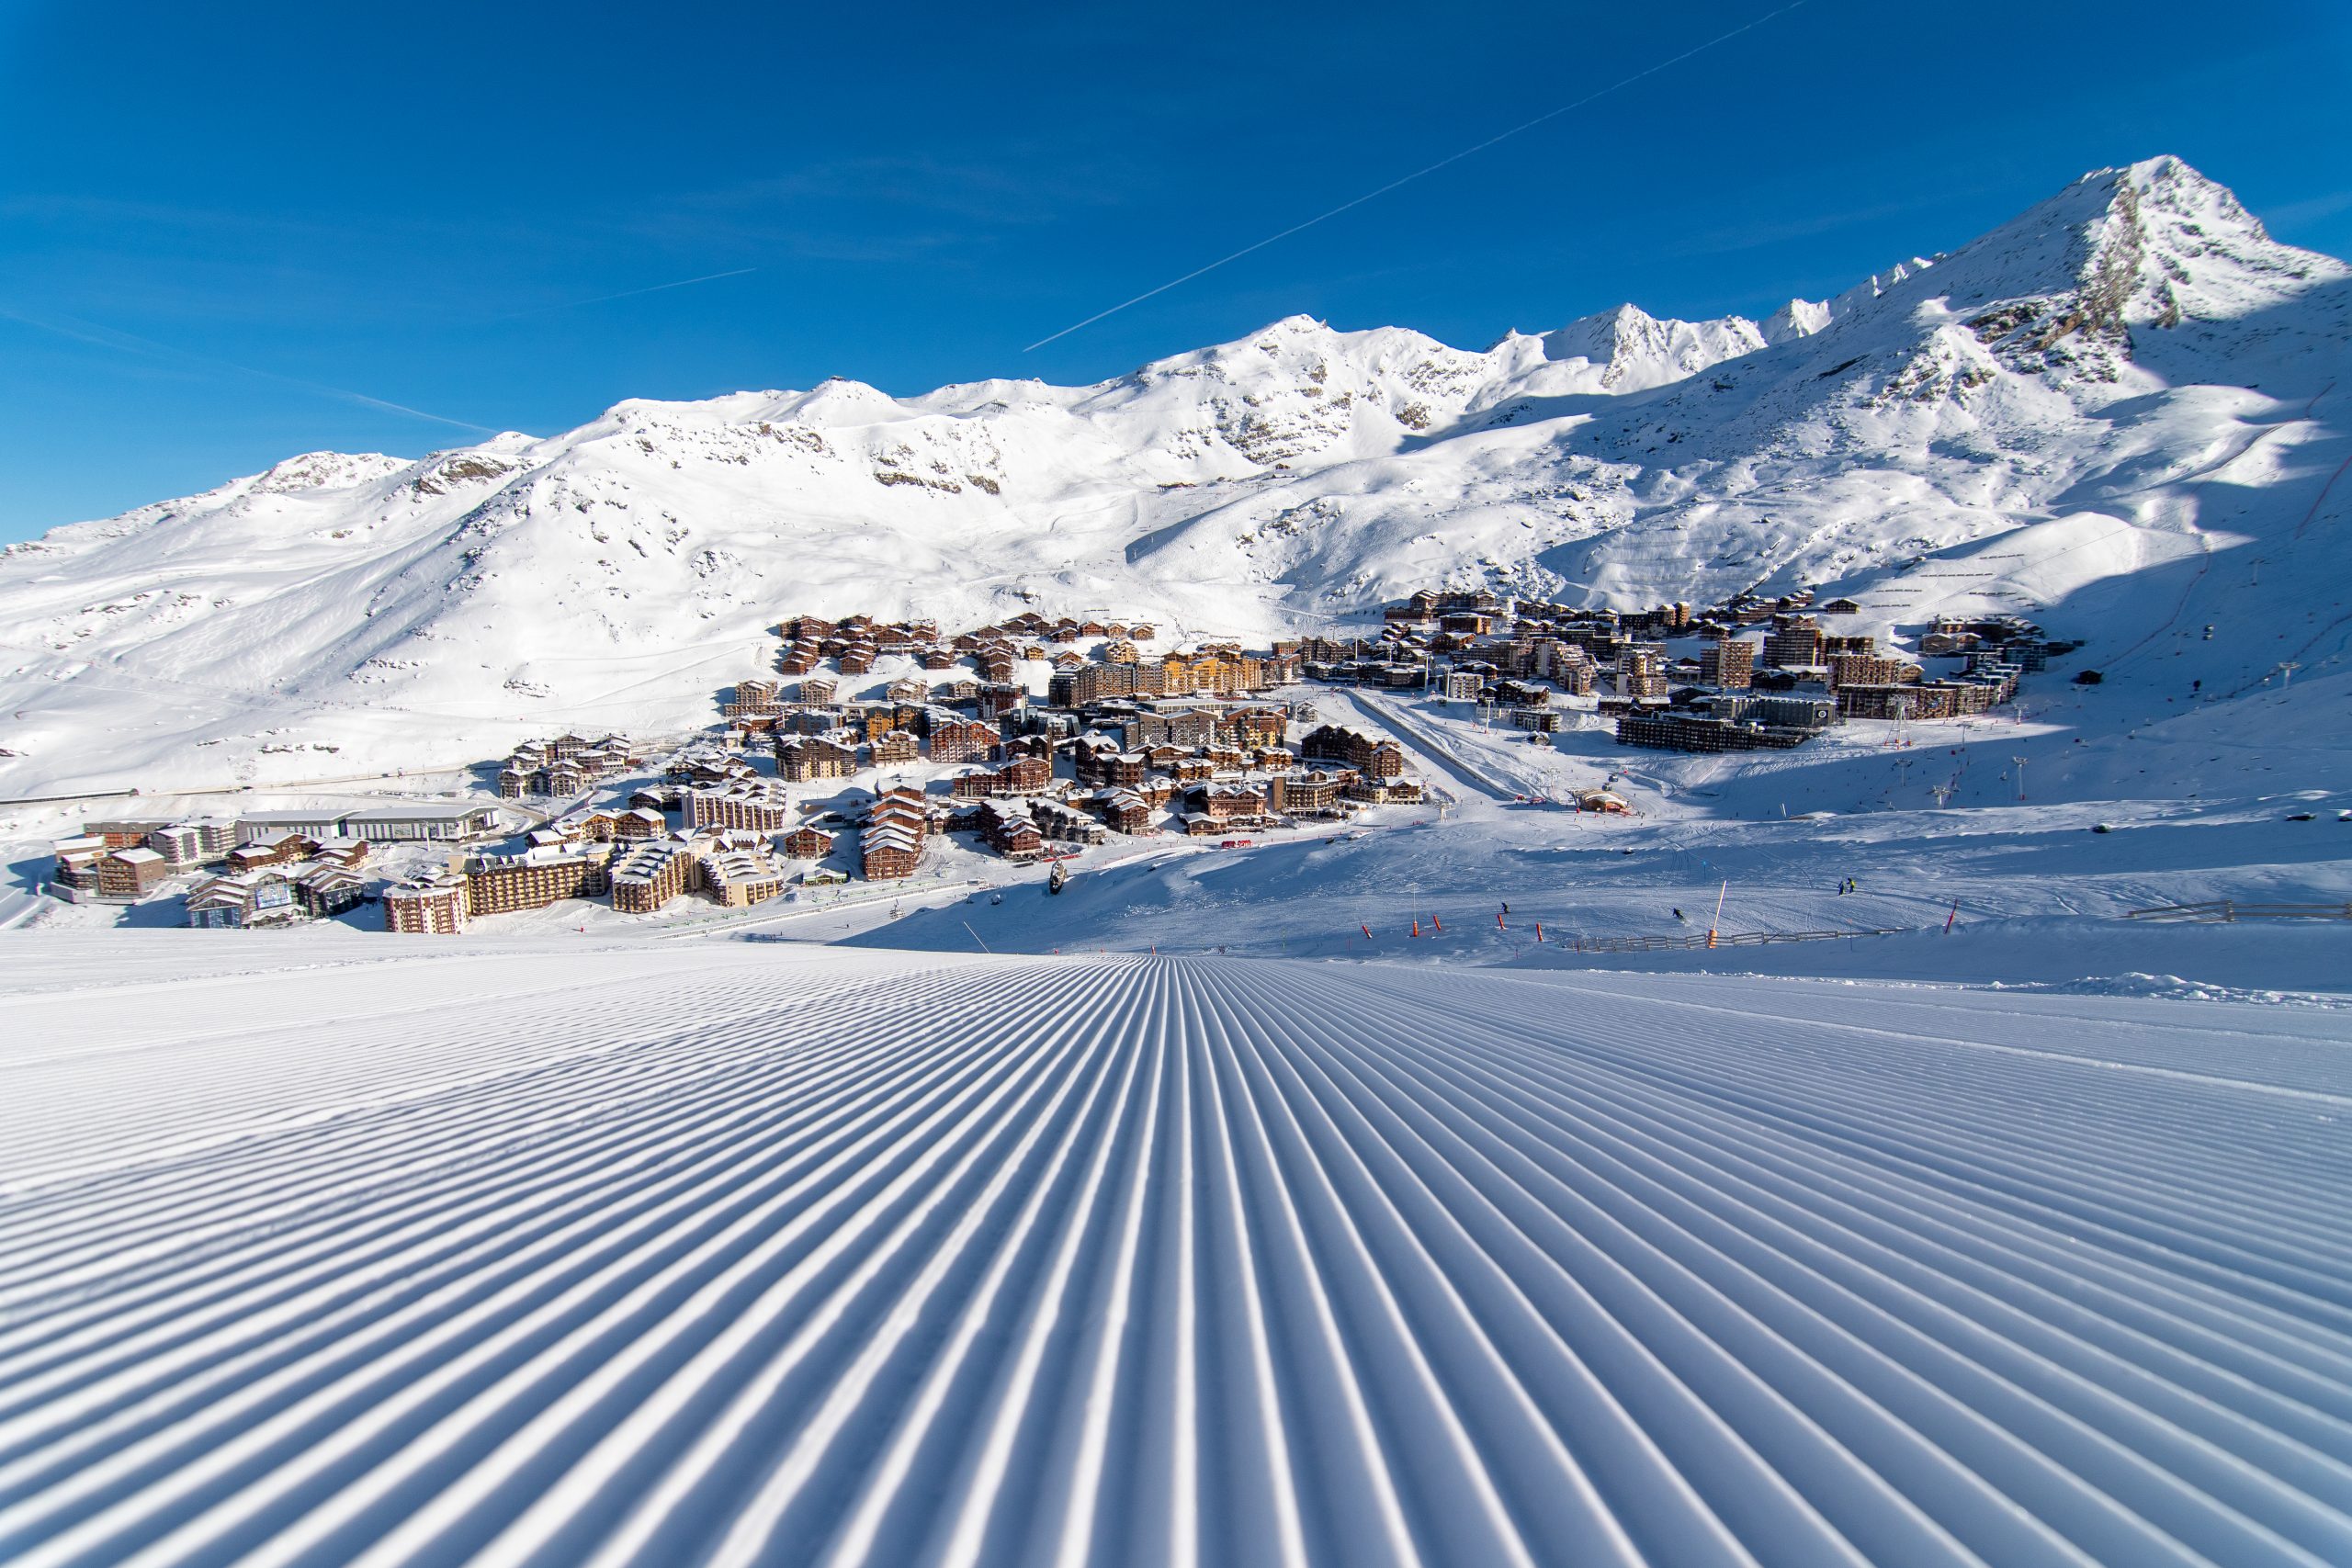 3 Awesome High-Altitude French Alpine Resorts